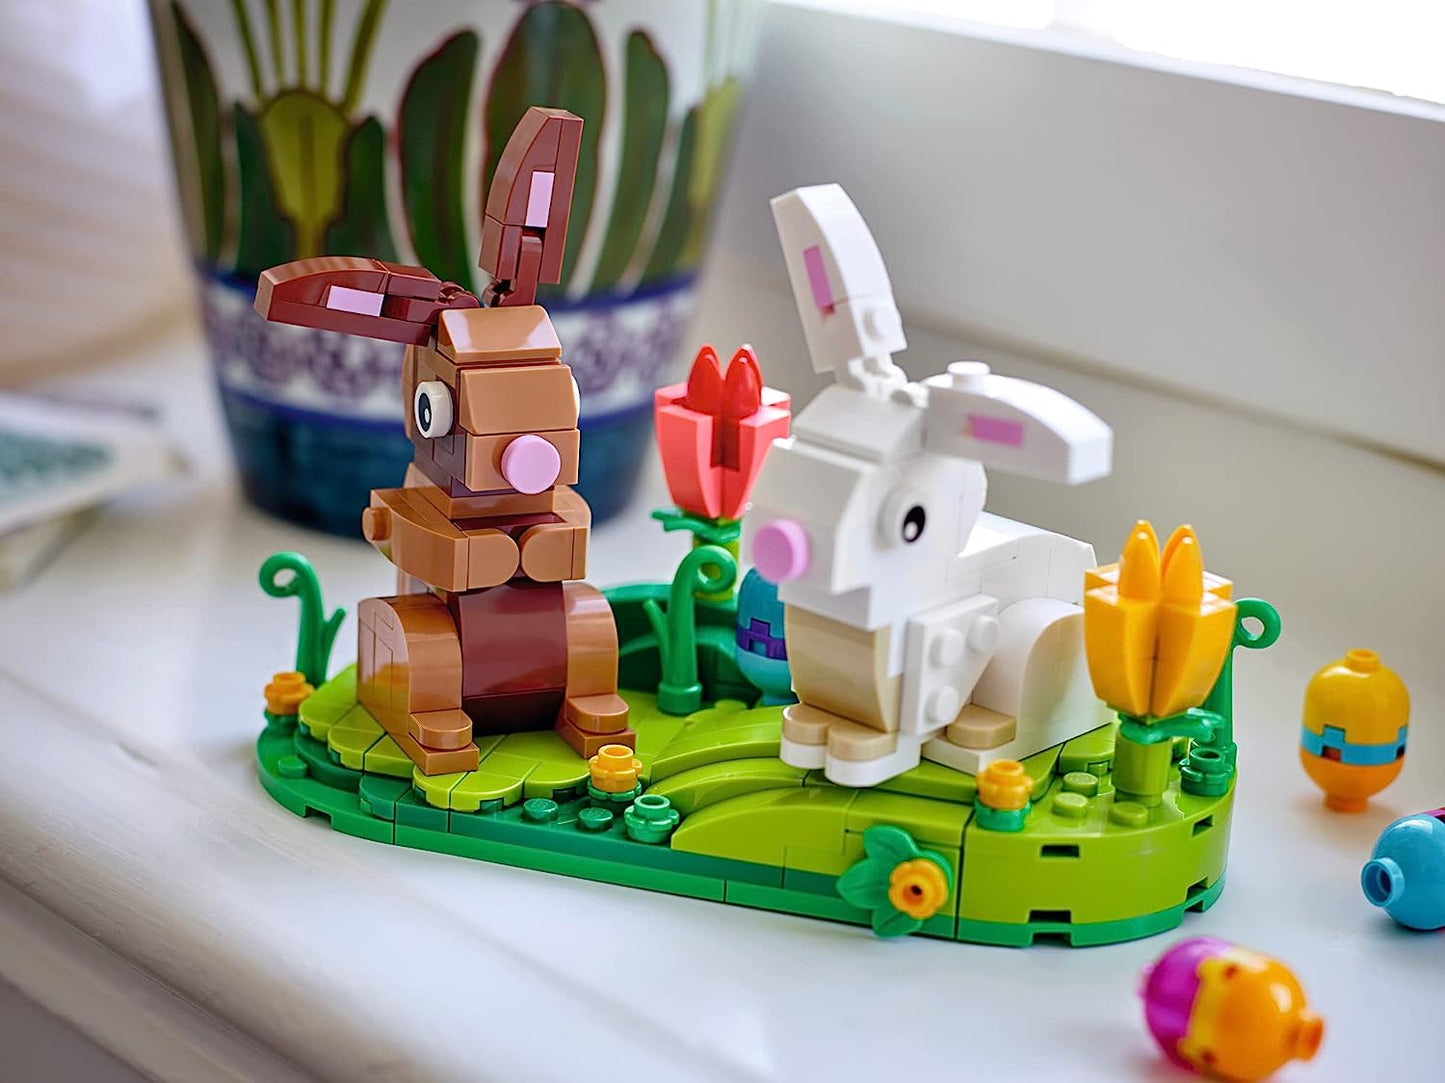 LEGO Easter Rabbits Display 40523 Building Toy Set, Includes Colorful Easter Eggs and Tulips, Easter Decorations